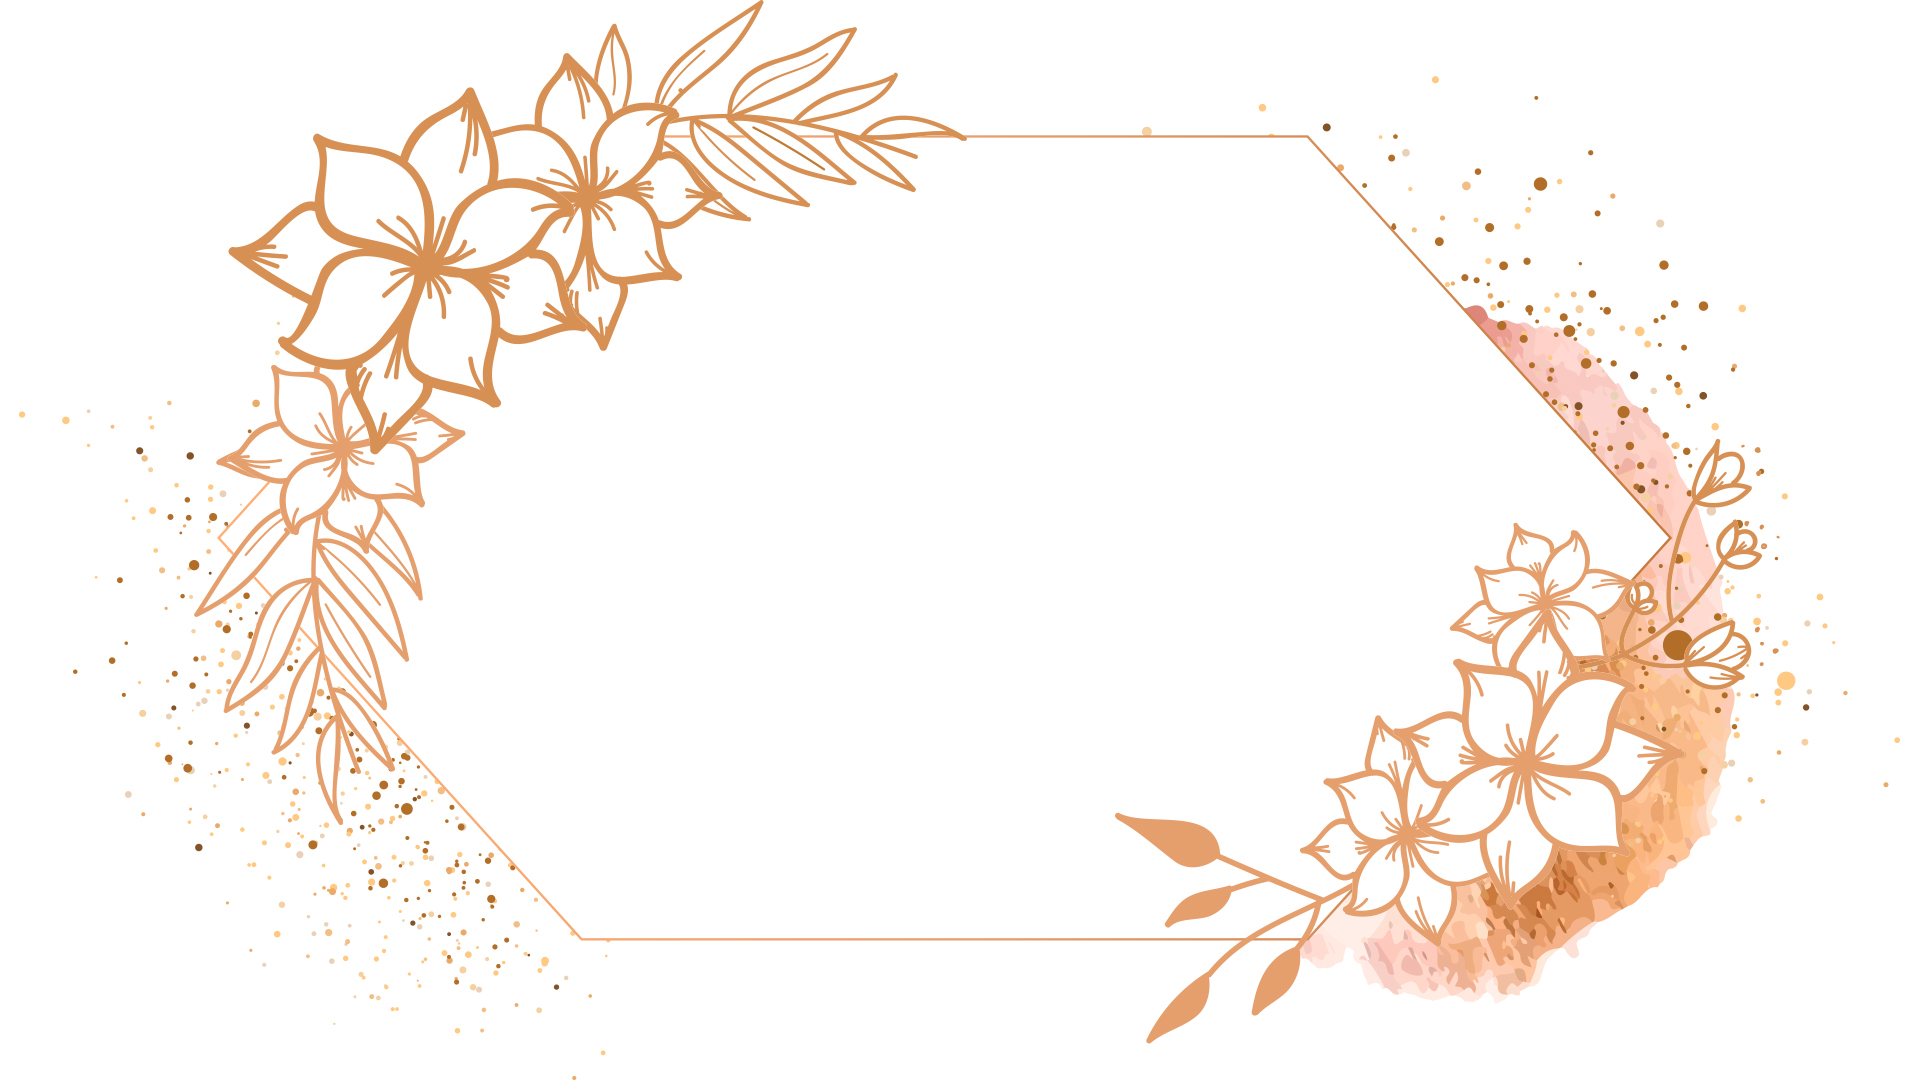 Fall Flower Powerpoint Templates - Flowers, Google Slides, White - Free PPT Backgrounds and